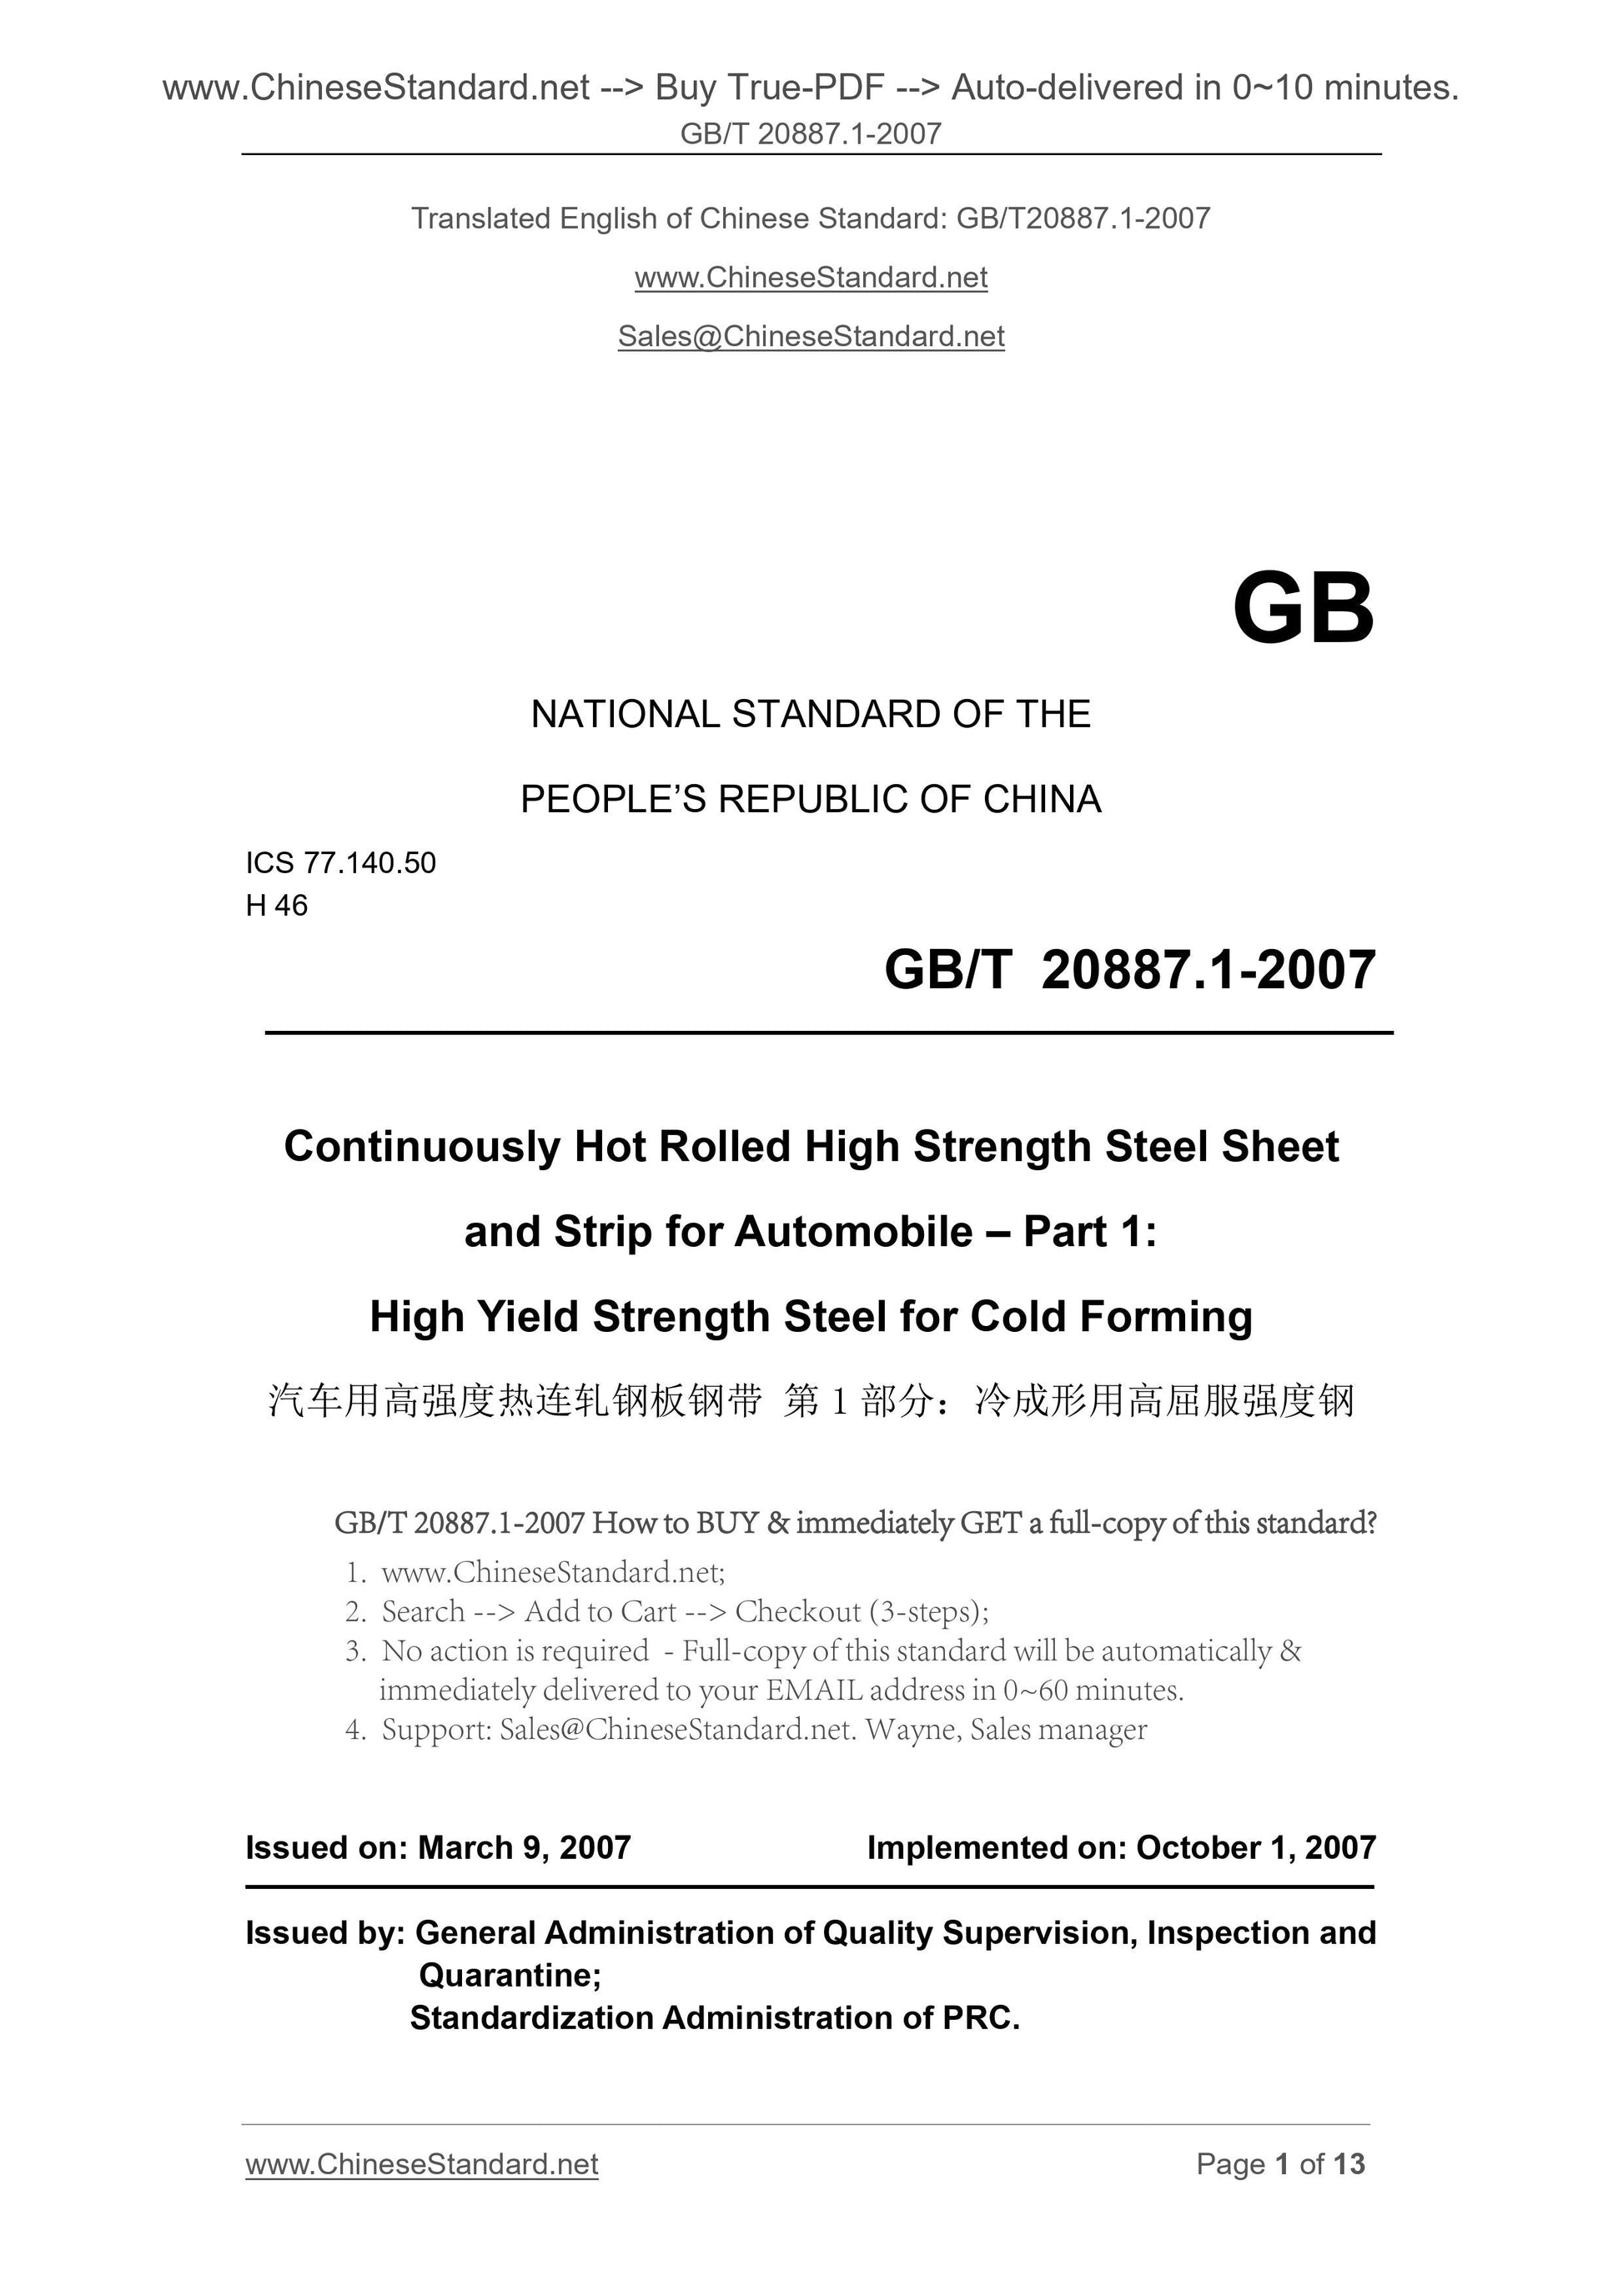 GB/T 20887.1-2007 Page 1